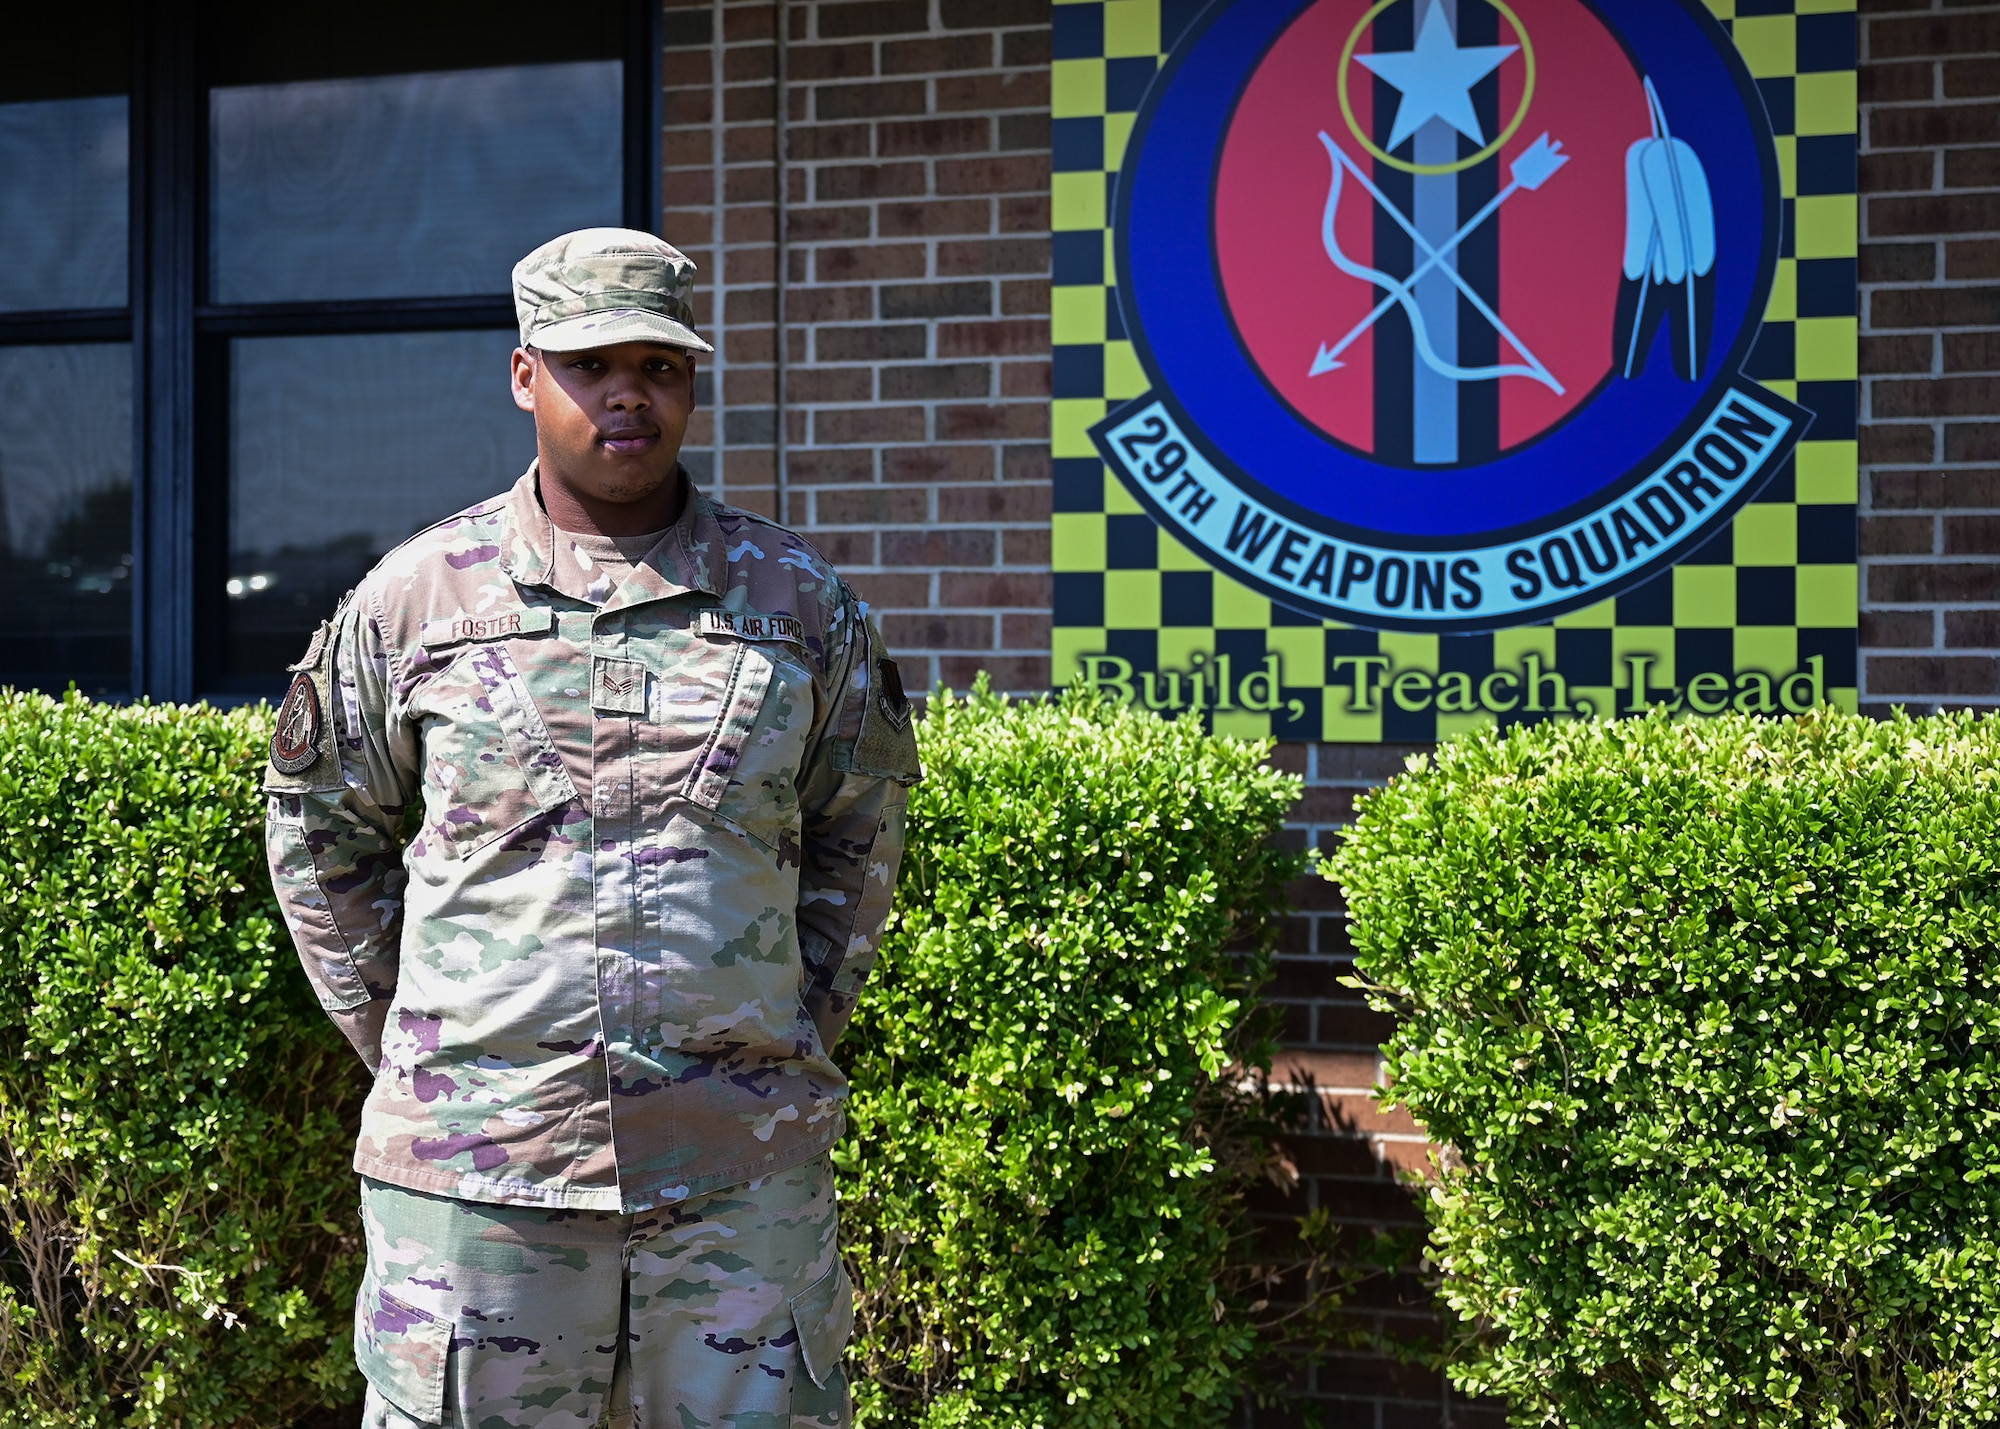 An Airman stands in front of a sign that displays the 29th Weapons Squadron patch.